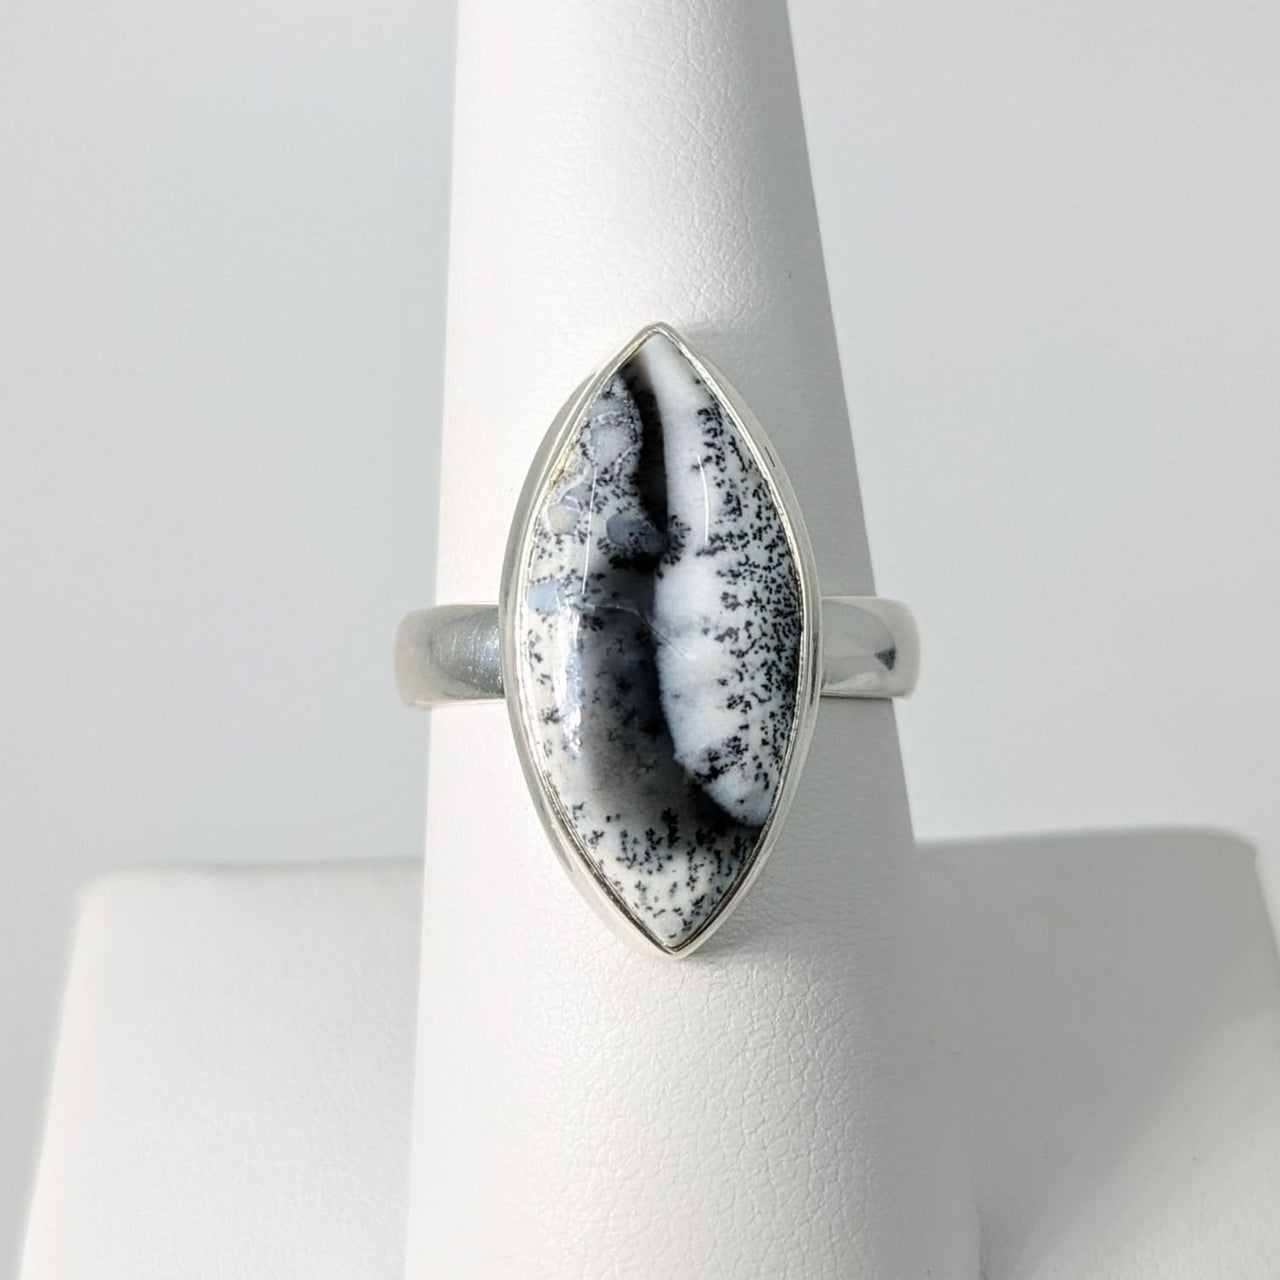 Dendrite Agate Marquis Sterling Silver Ring Sz. 8 #SK8335 - 